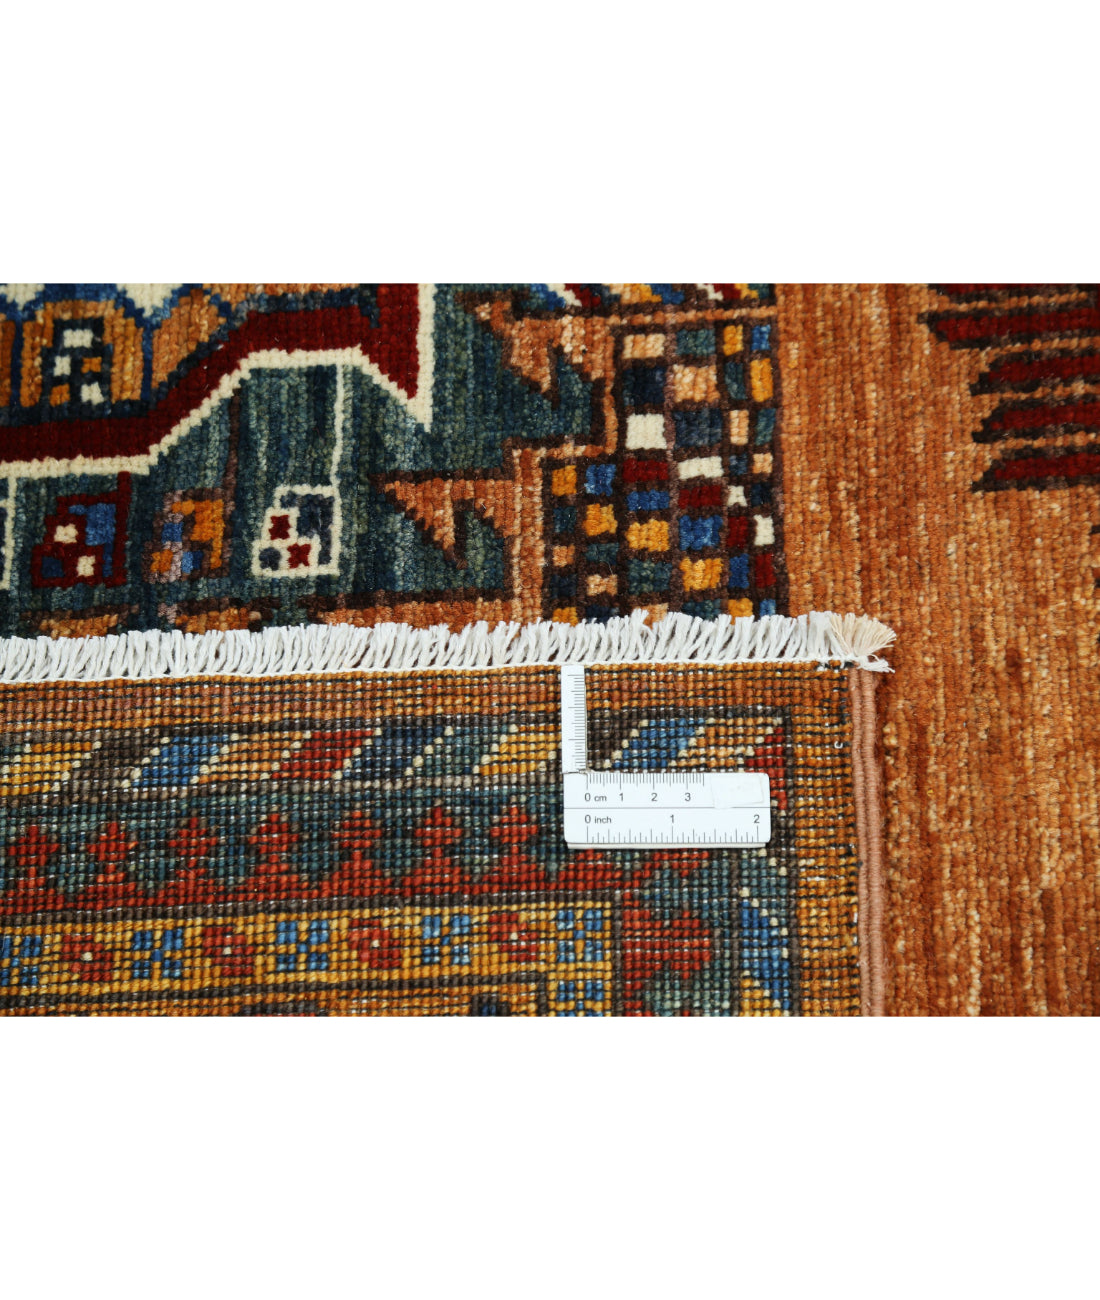 Hand Knotted Nomadic Caucasian Humna Wool Rug - 8'1'' x 10'0'' 8'1'' x 10'0'' (243 X 300) / Brown / Red